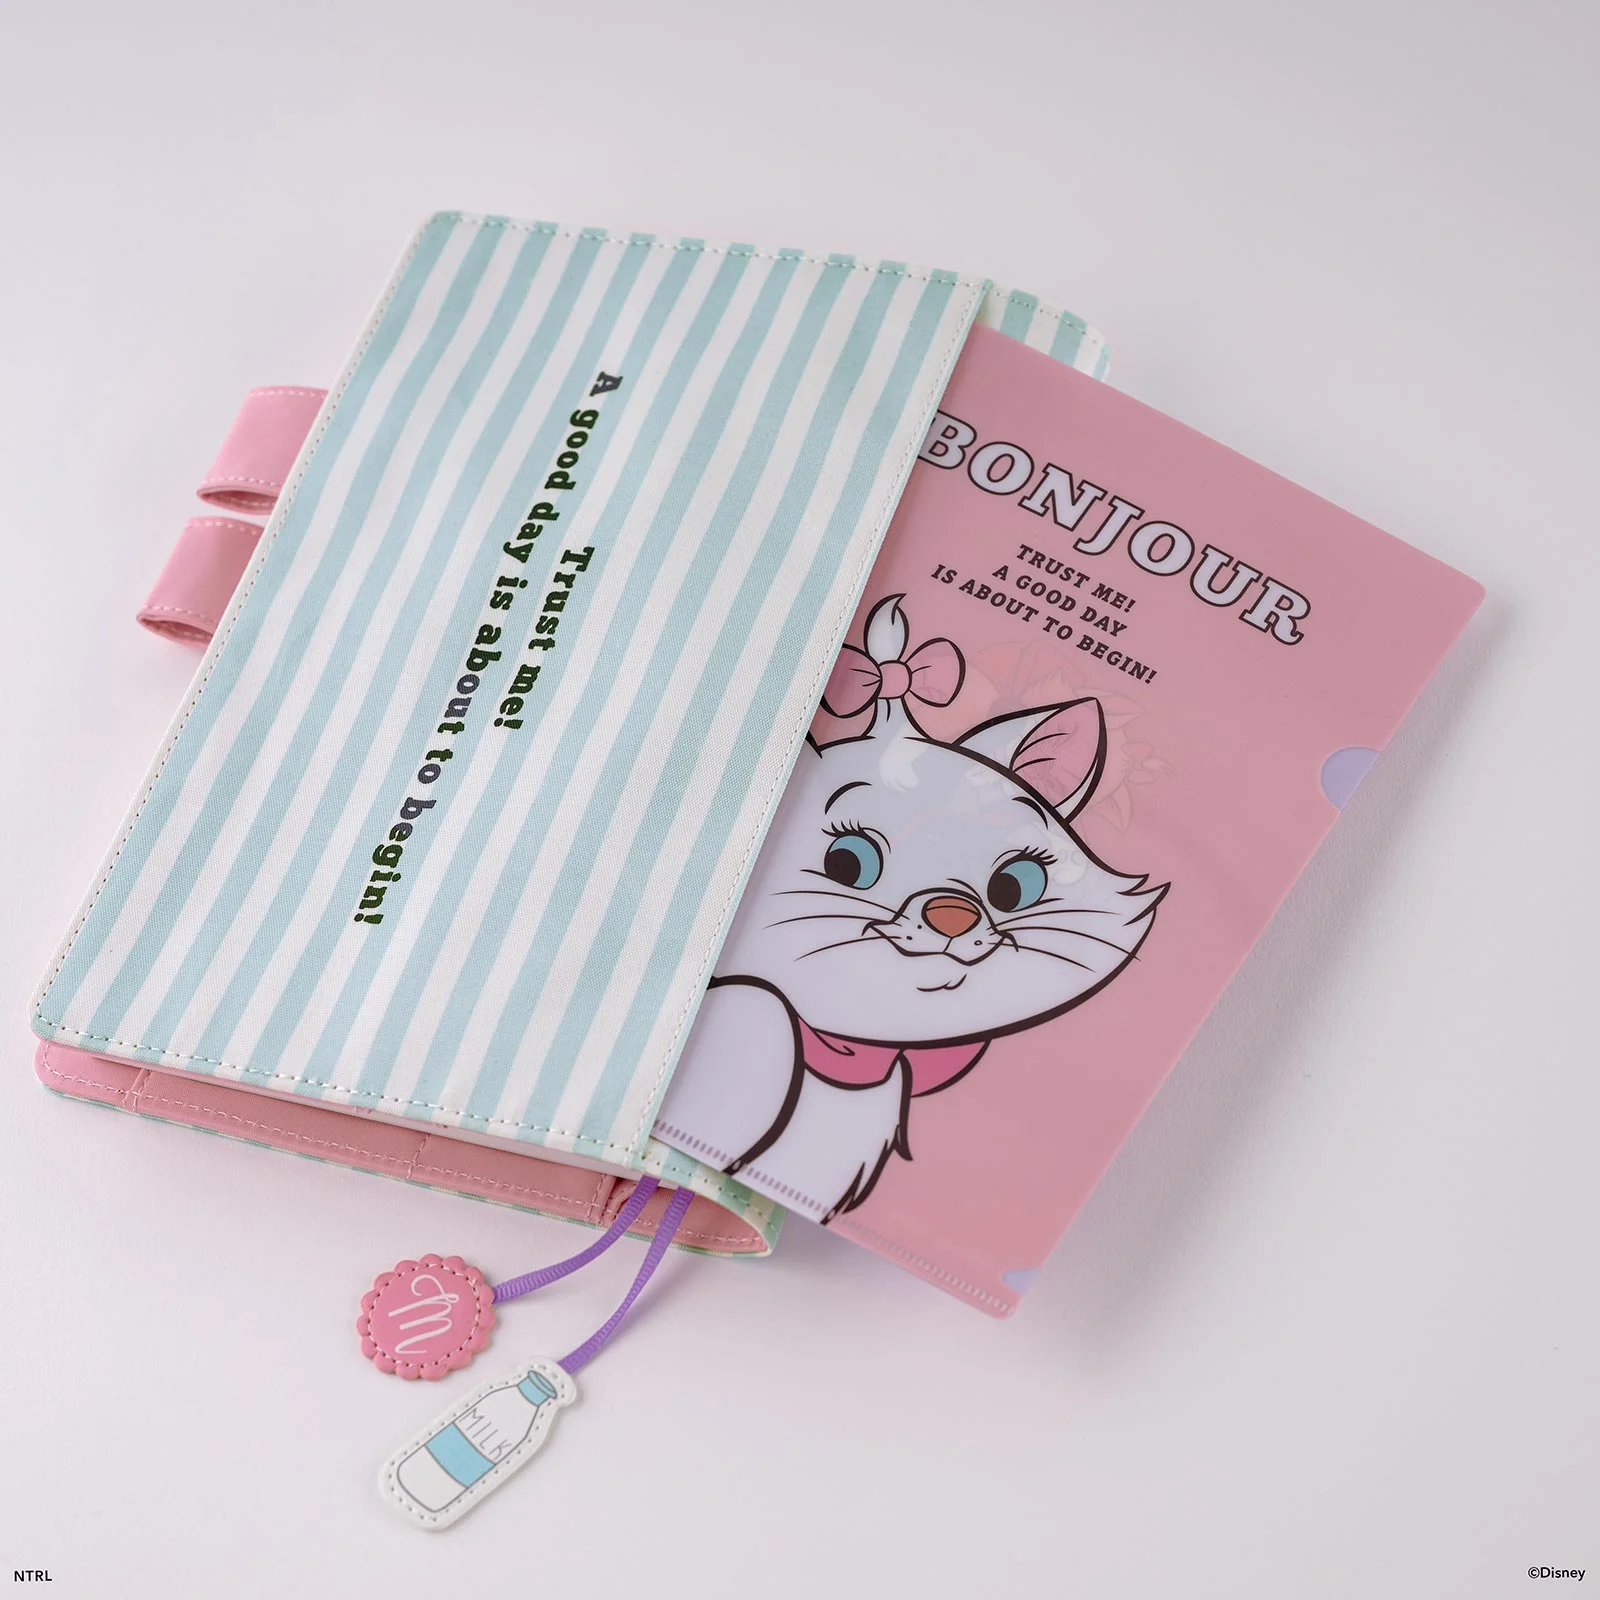 The Aristocats: Hobonichi Folder Set of 2 for A5 Size (The 